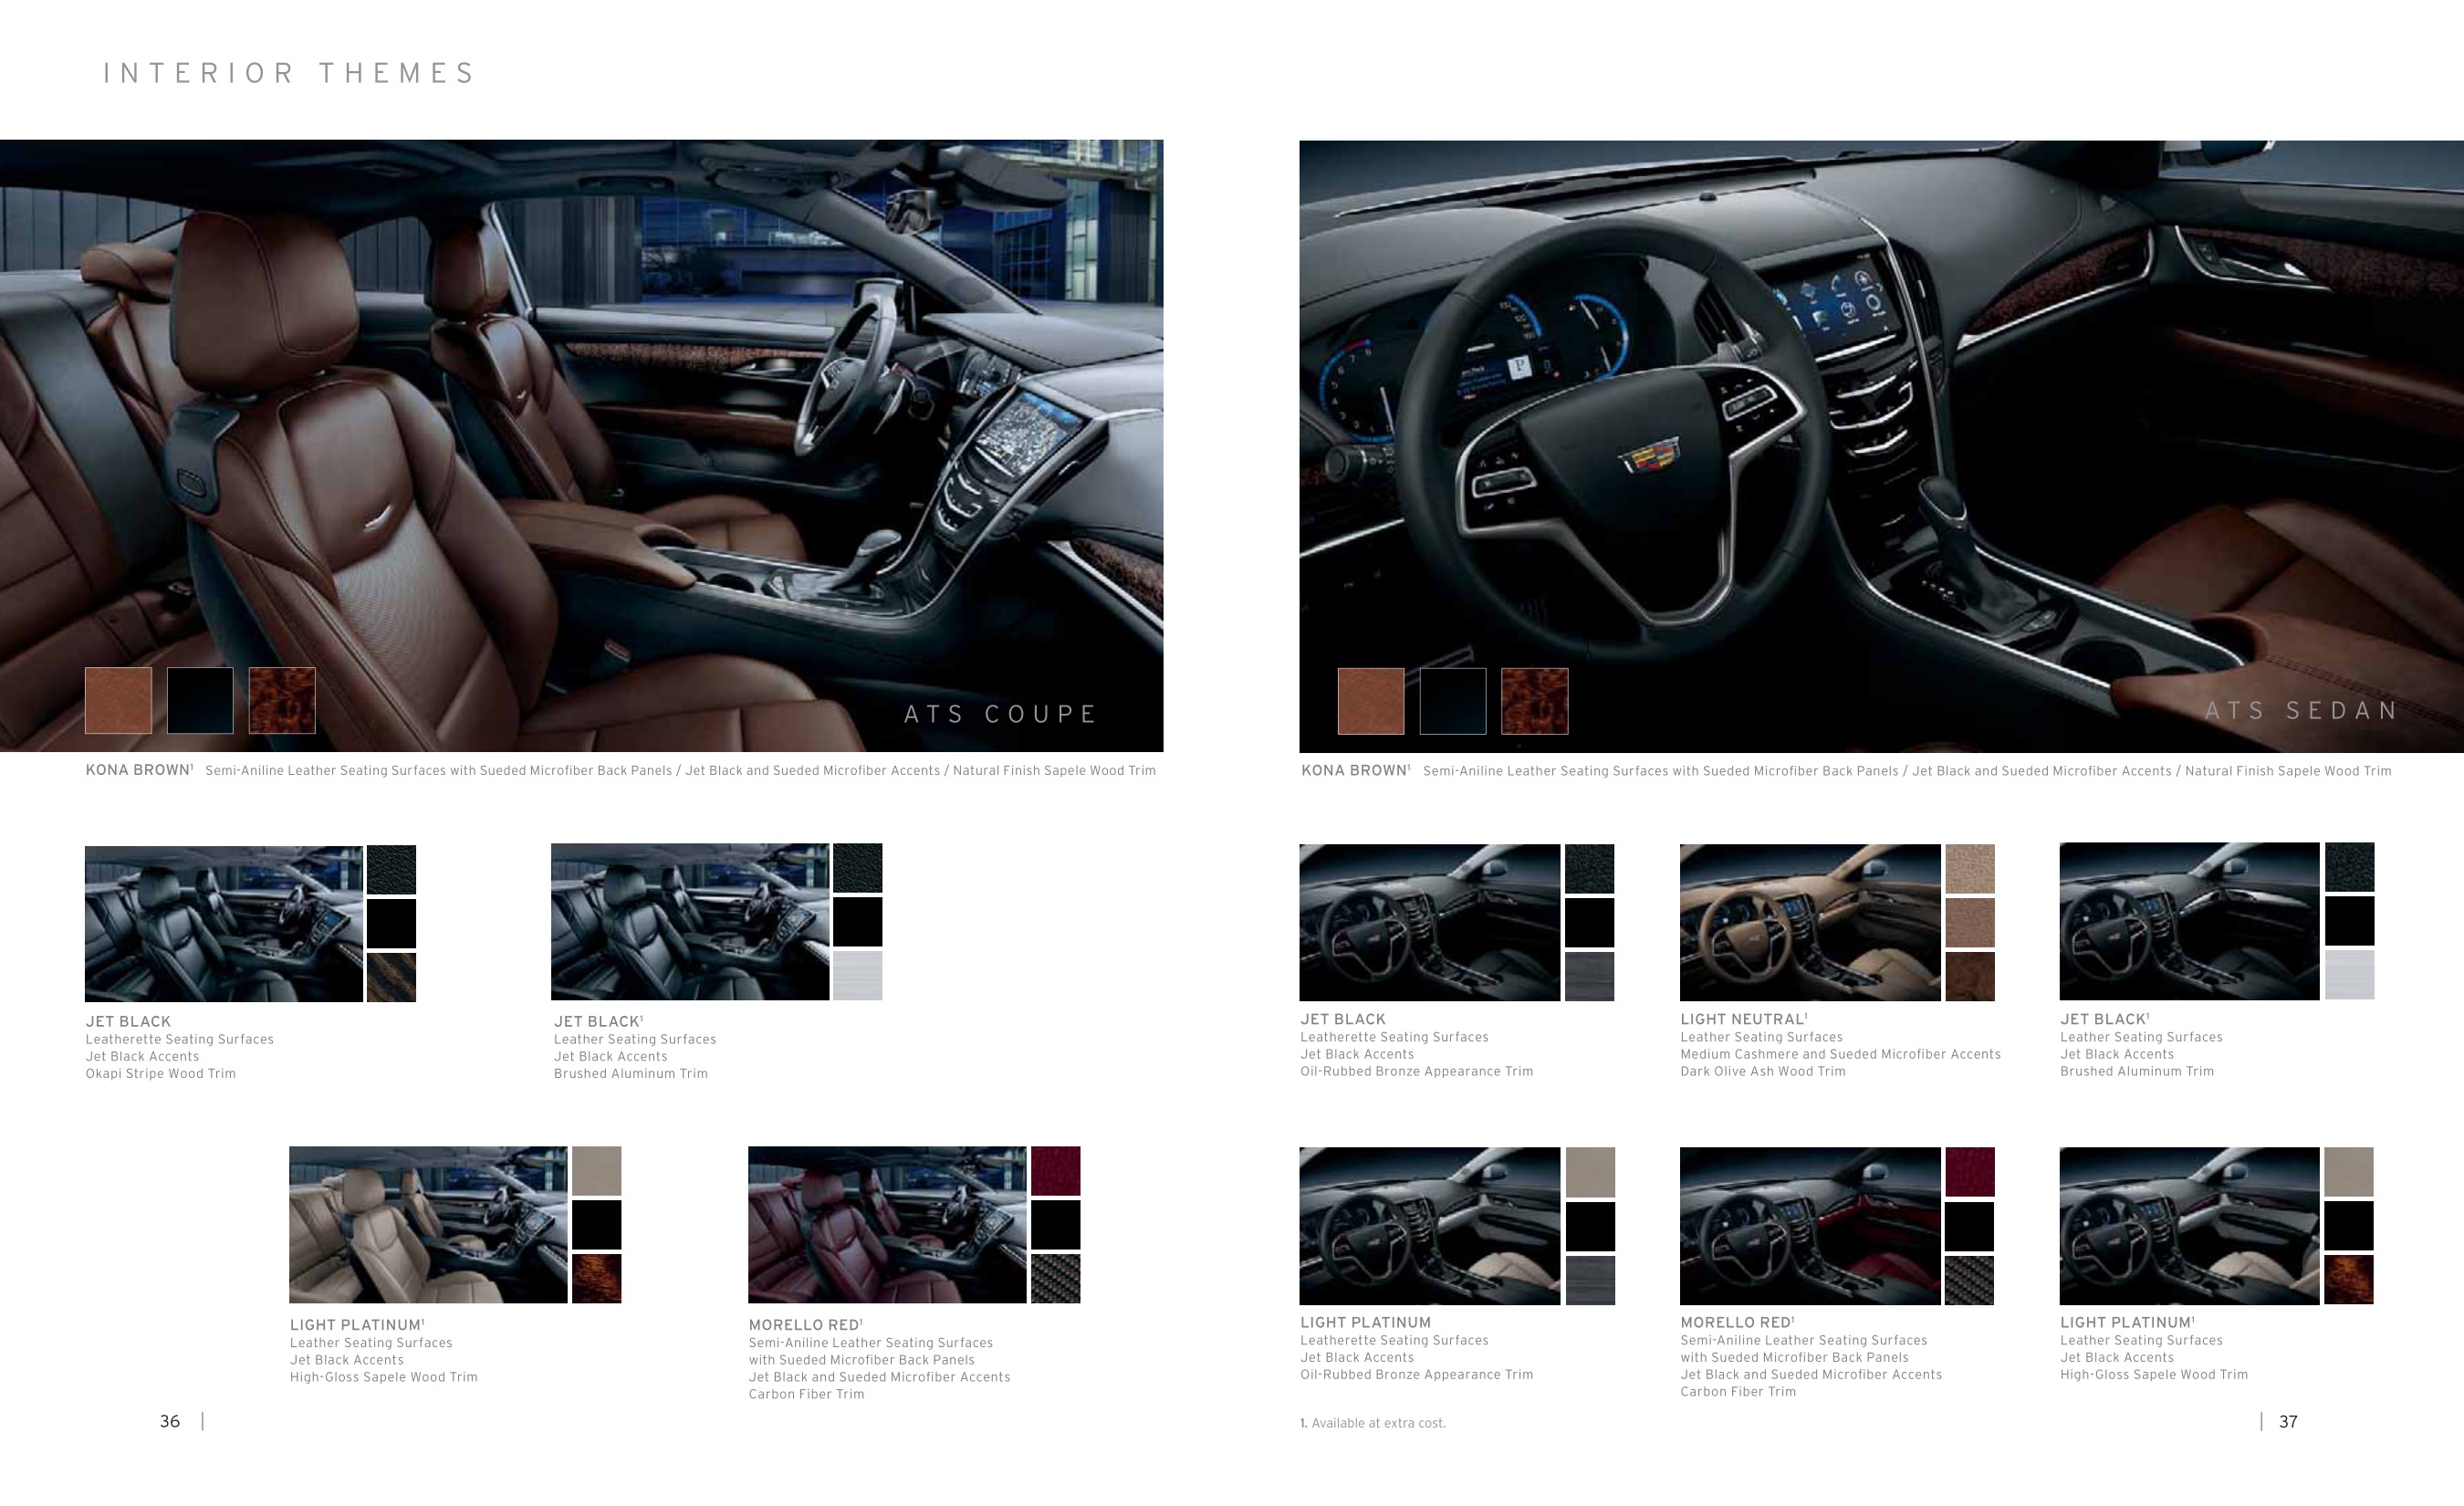 2015 Cadillac ATS Coupe Brochure Page 13